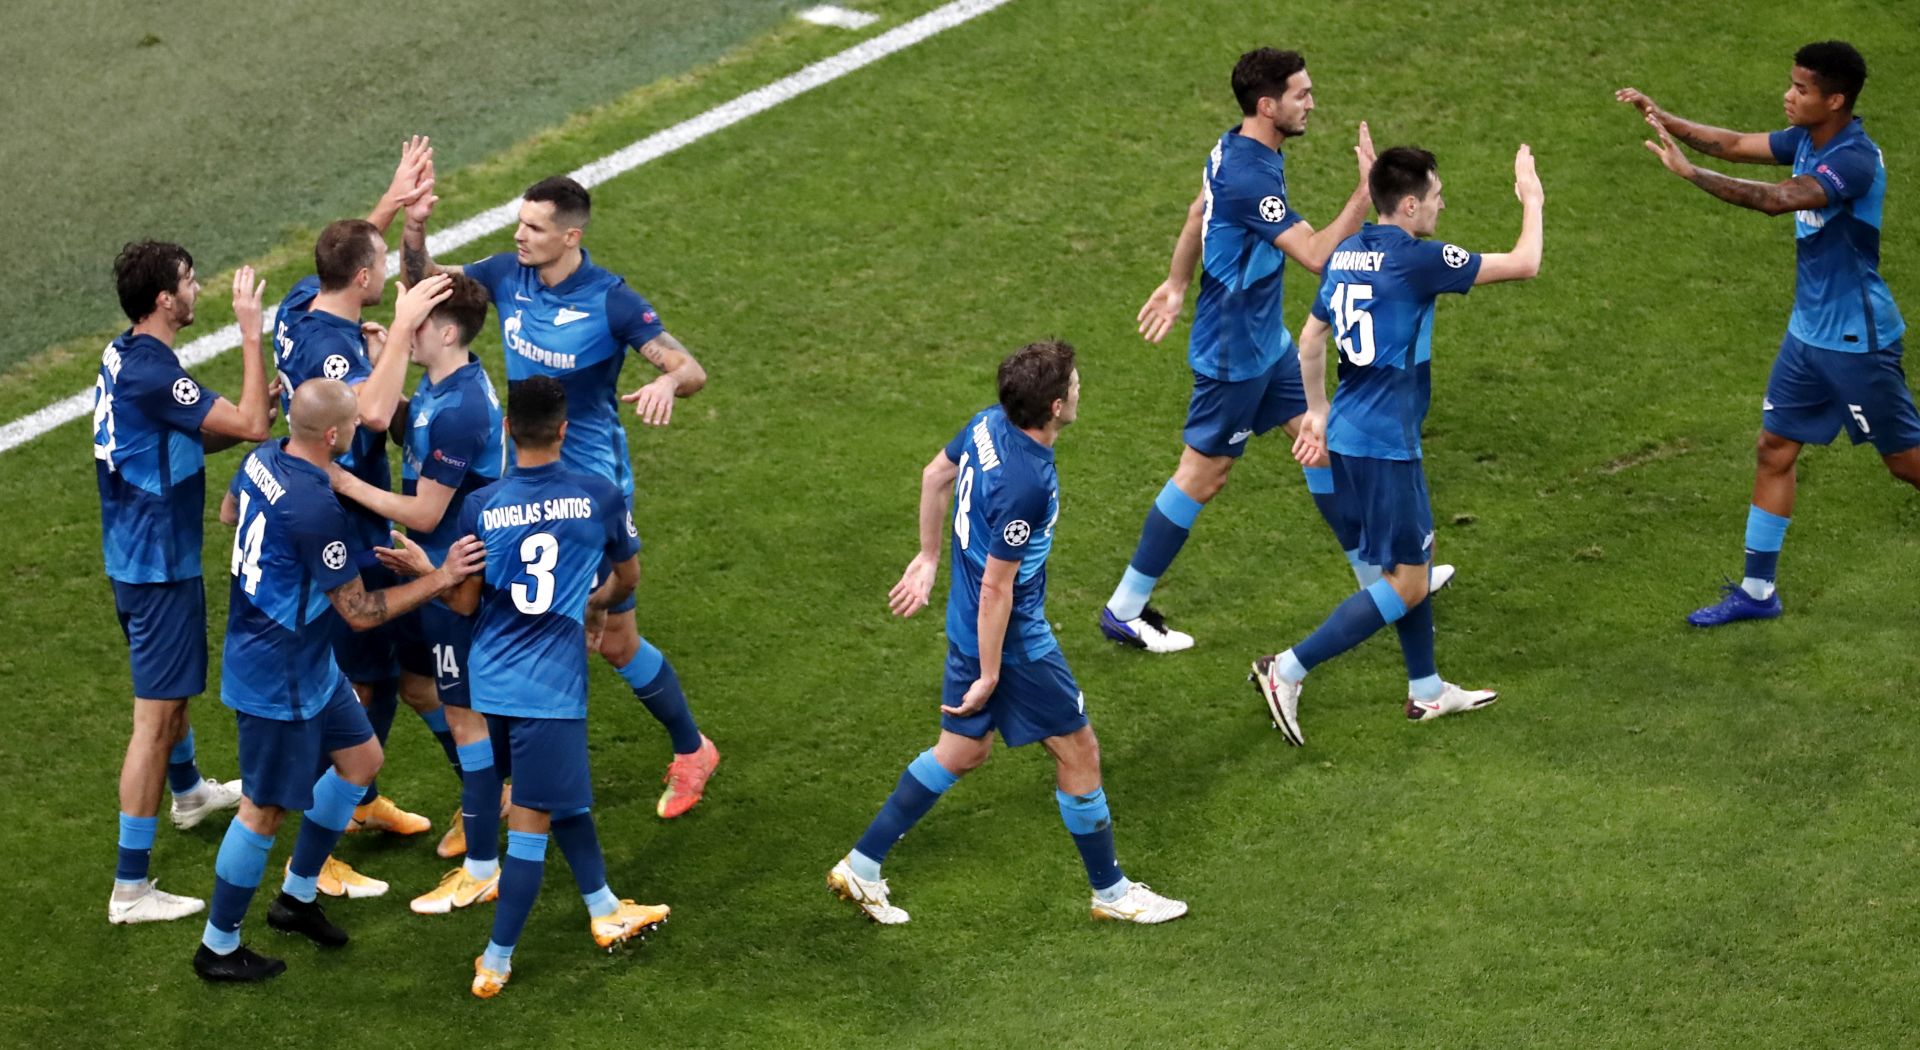 epa08798831 Aleksandr Erokhin (far left) of Zenit celebrates with teammates after scoring the opening goal during the UEFA Champions League group F soccer match between FC Zenit St. Petersburg and SS Lazio in St. Petersburg, Russia, 04 November 2020.  EPA/Anatoly Maltsev